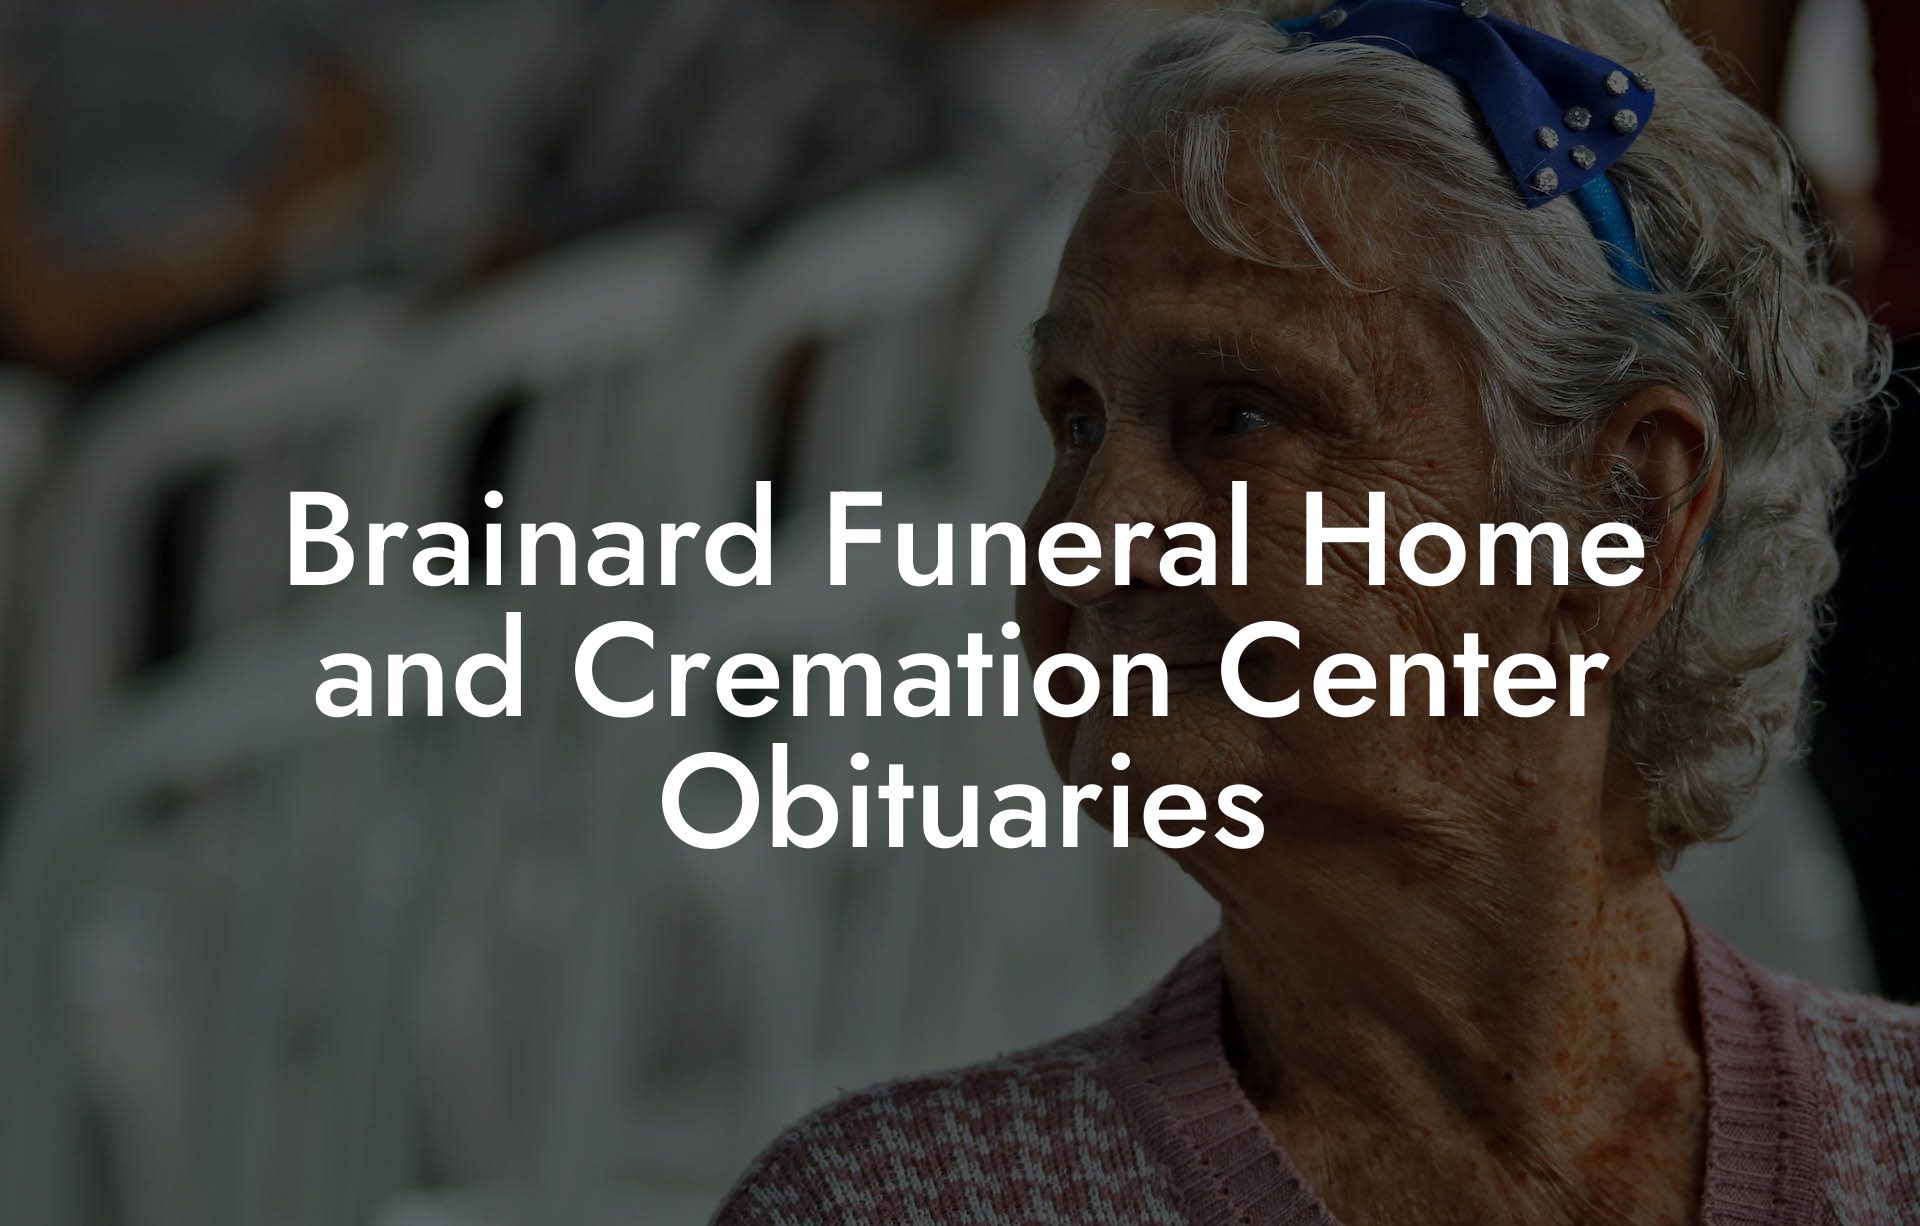 Brainard Funeral Home and Cremation Center Obituaries